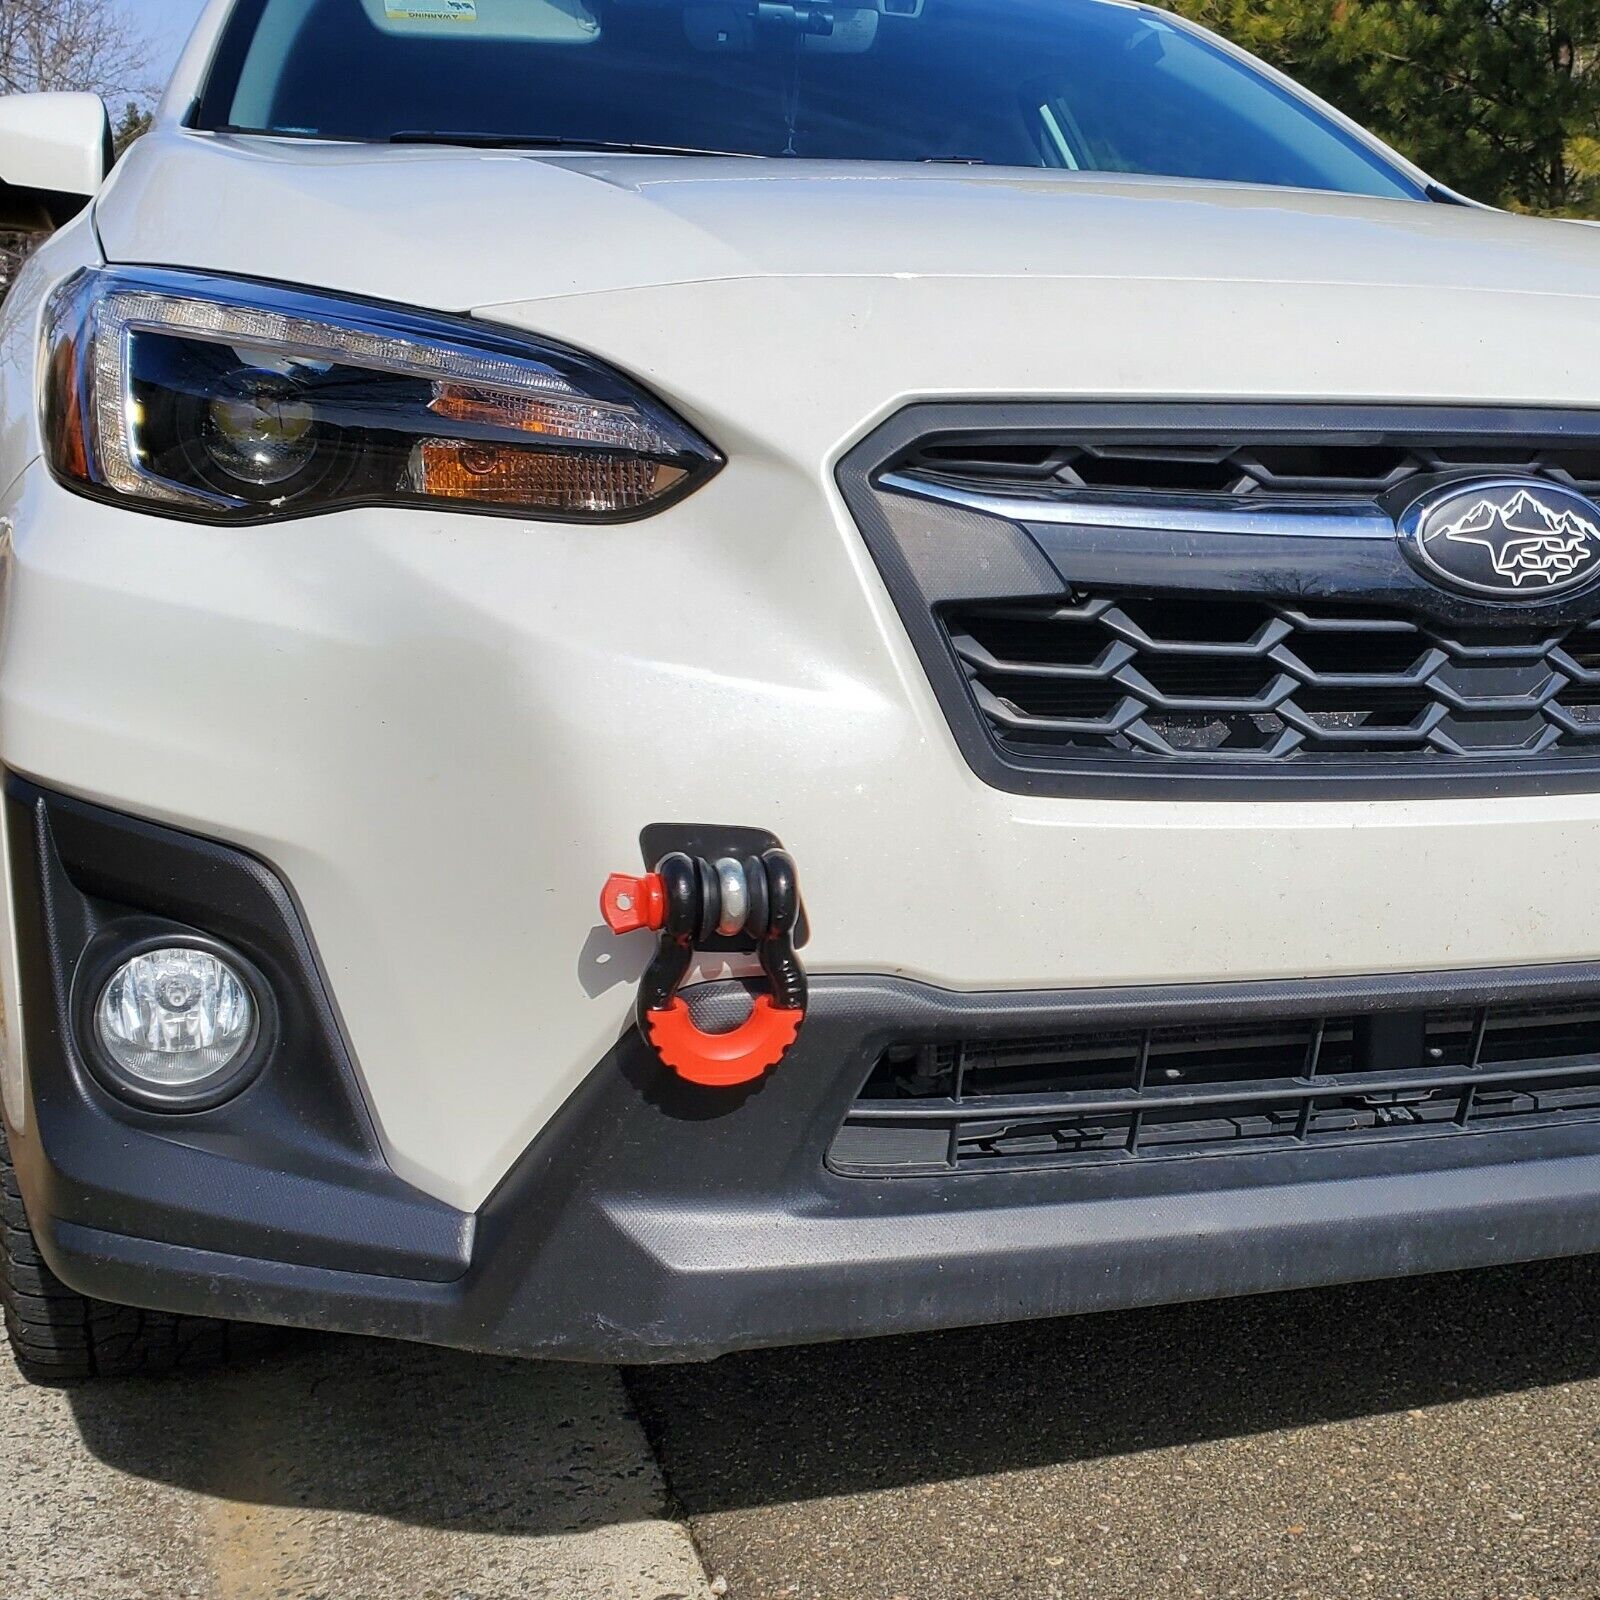 Subaru Official Tow Hook and Shackle with Guard